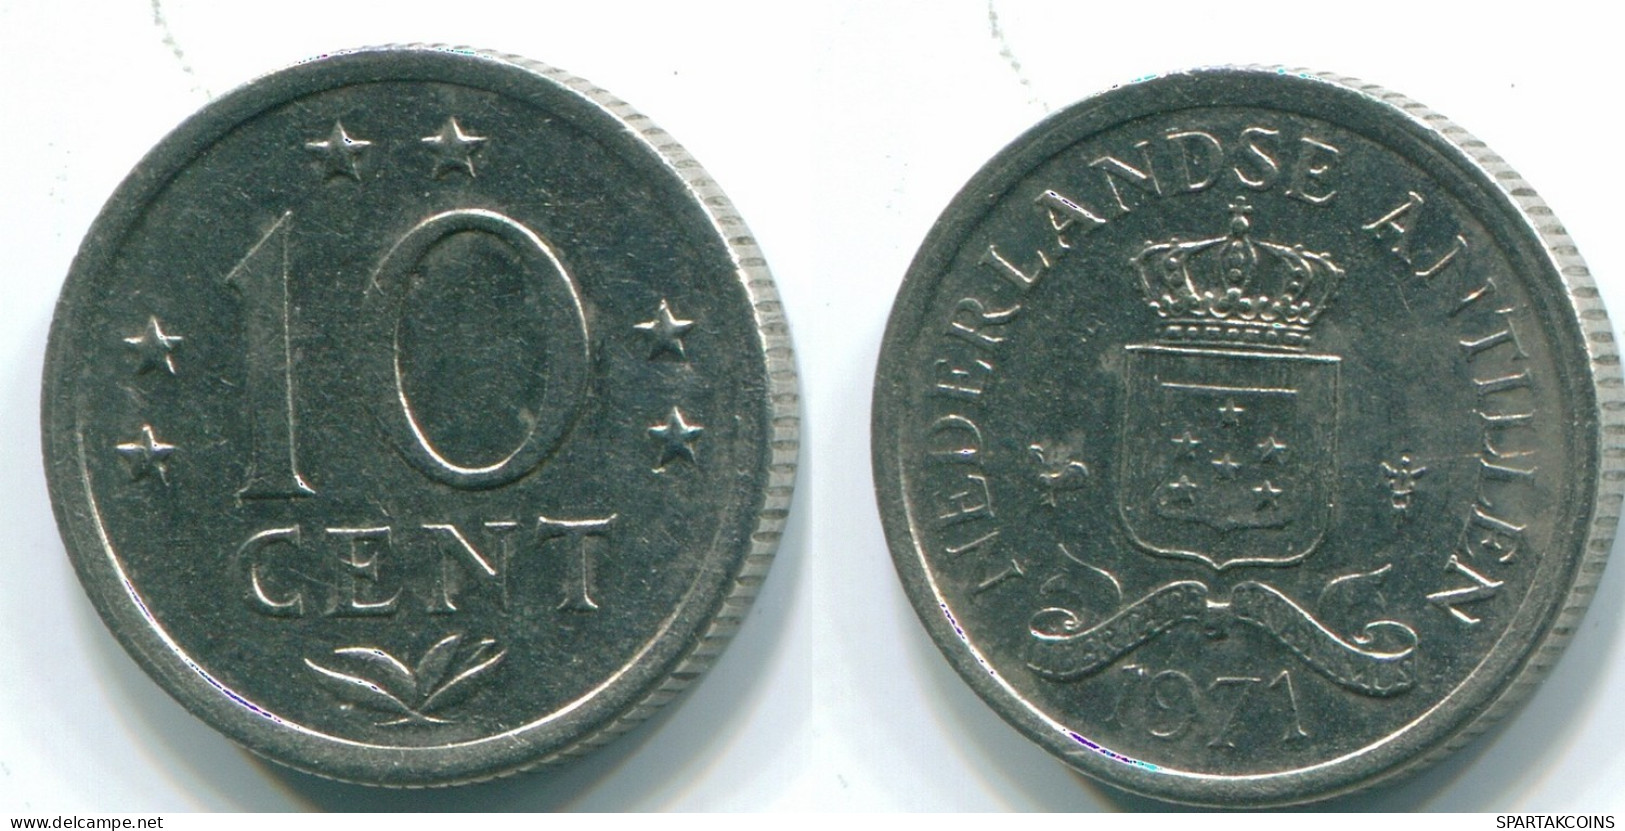 10 CENTS 1971 NETHERLANDS ANTILLES Nickel Colonial Coin #S13464.U.A - Netherlands Antilles